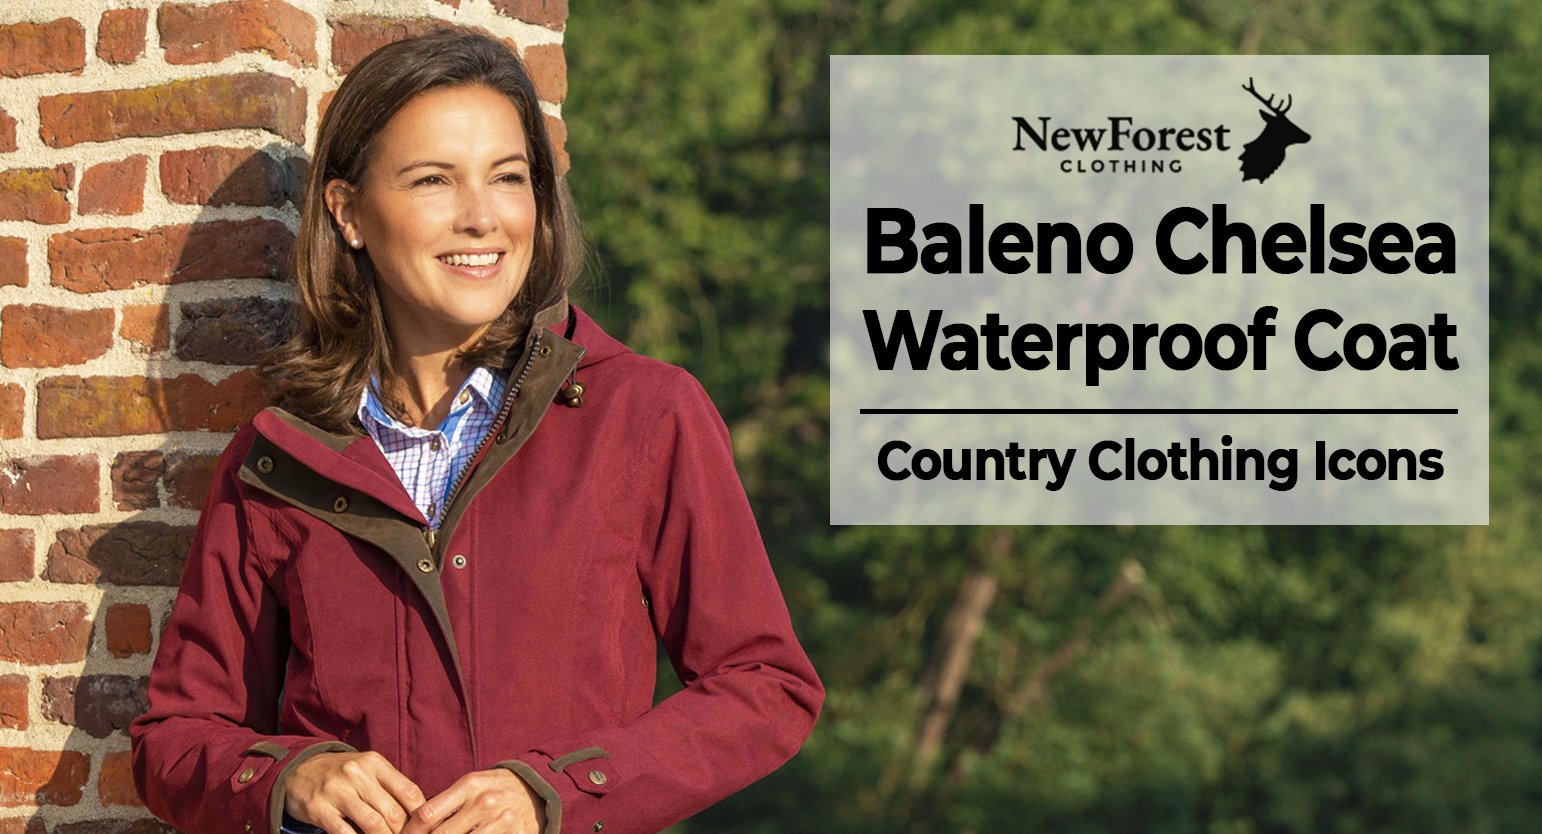 Country Clothing Icons - Baleno Chelsea Waterproof Coat